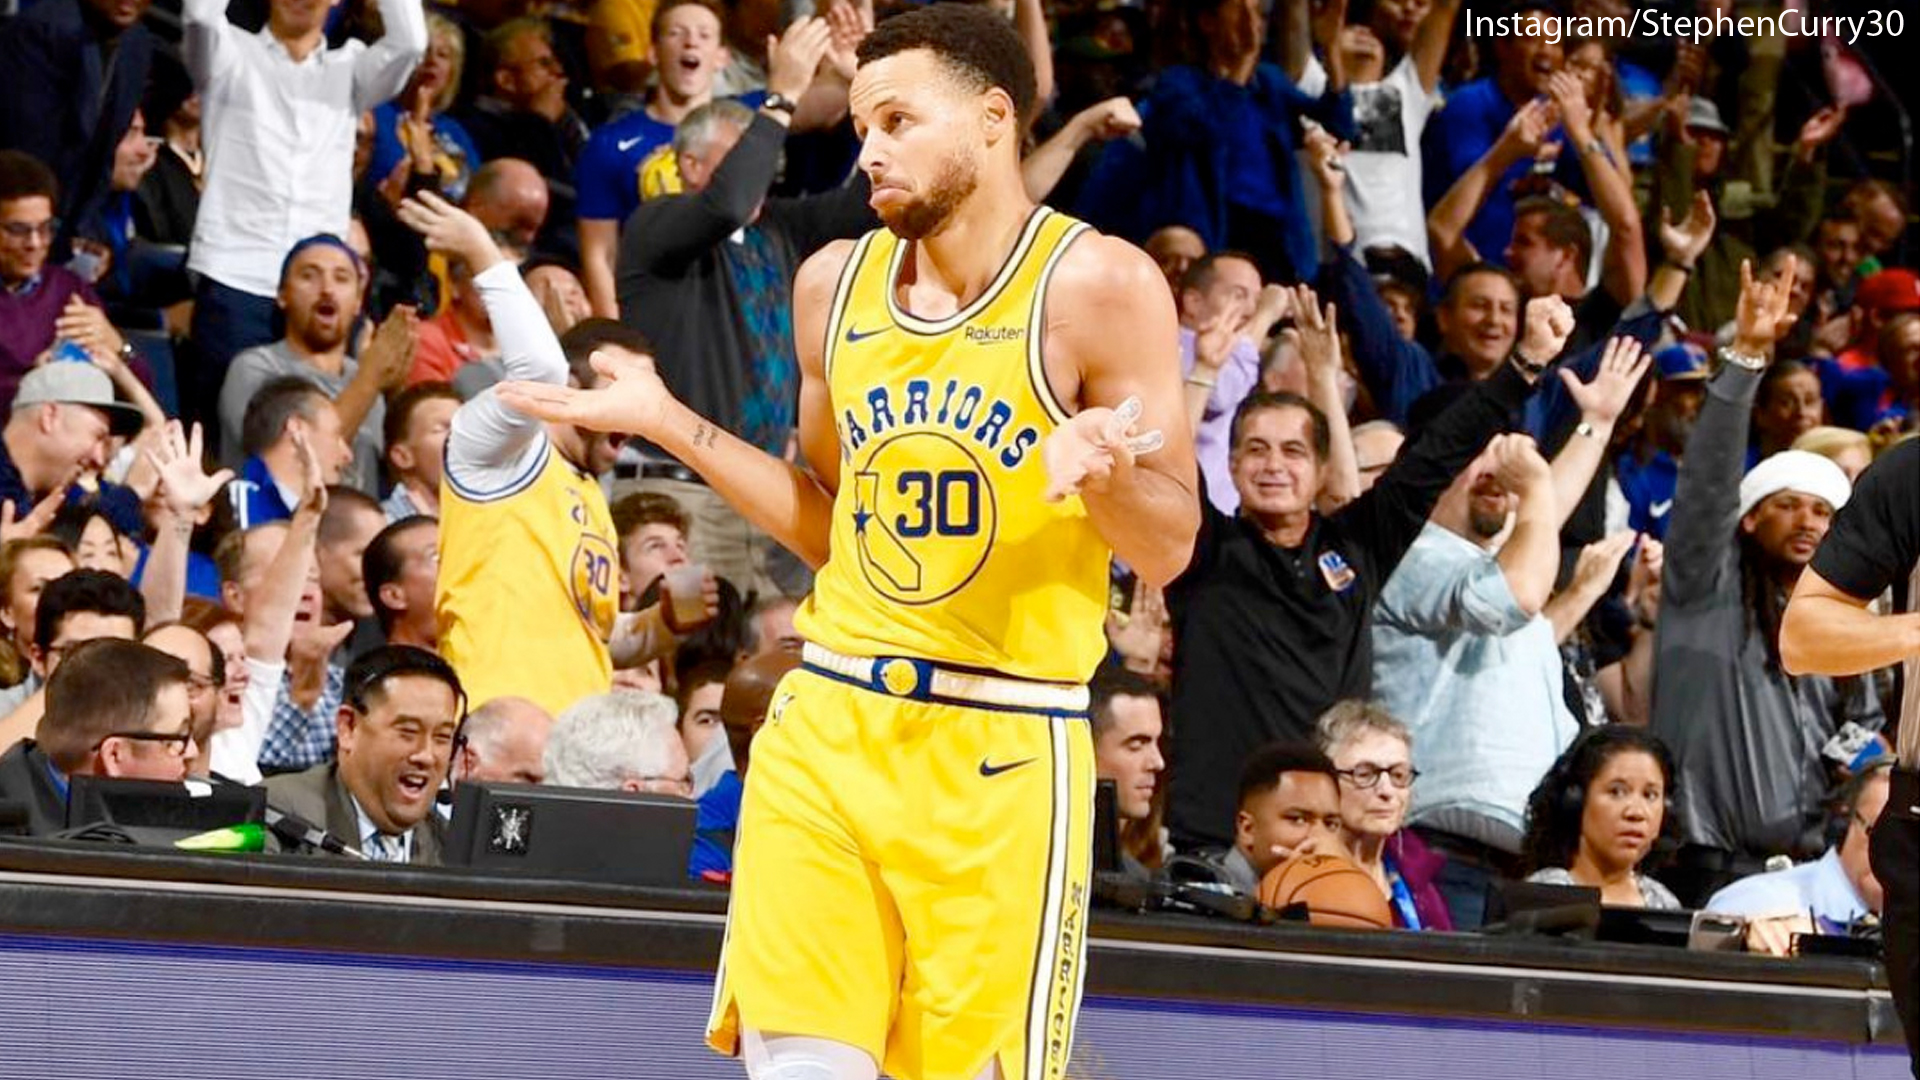 Steph Curry Sums Up His Point Performance With Instagram Post